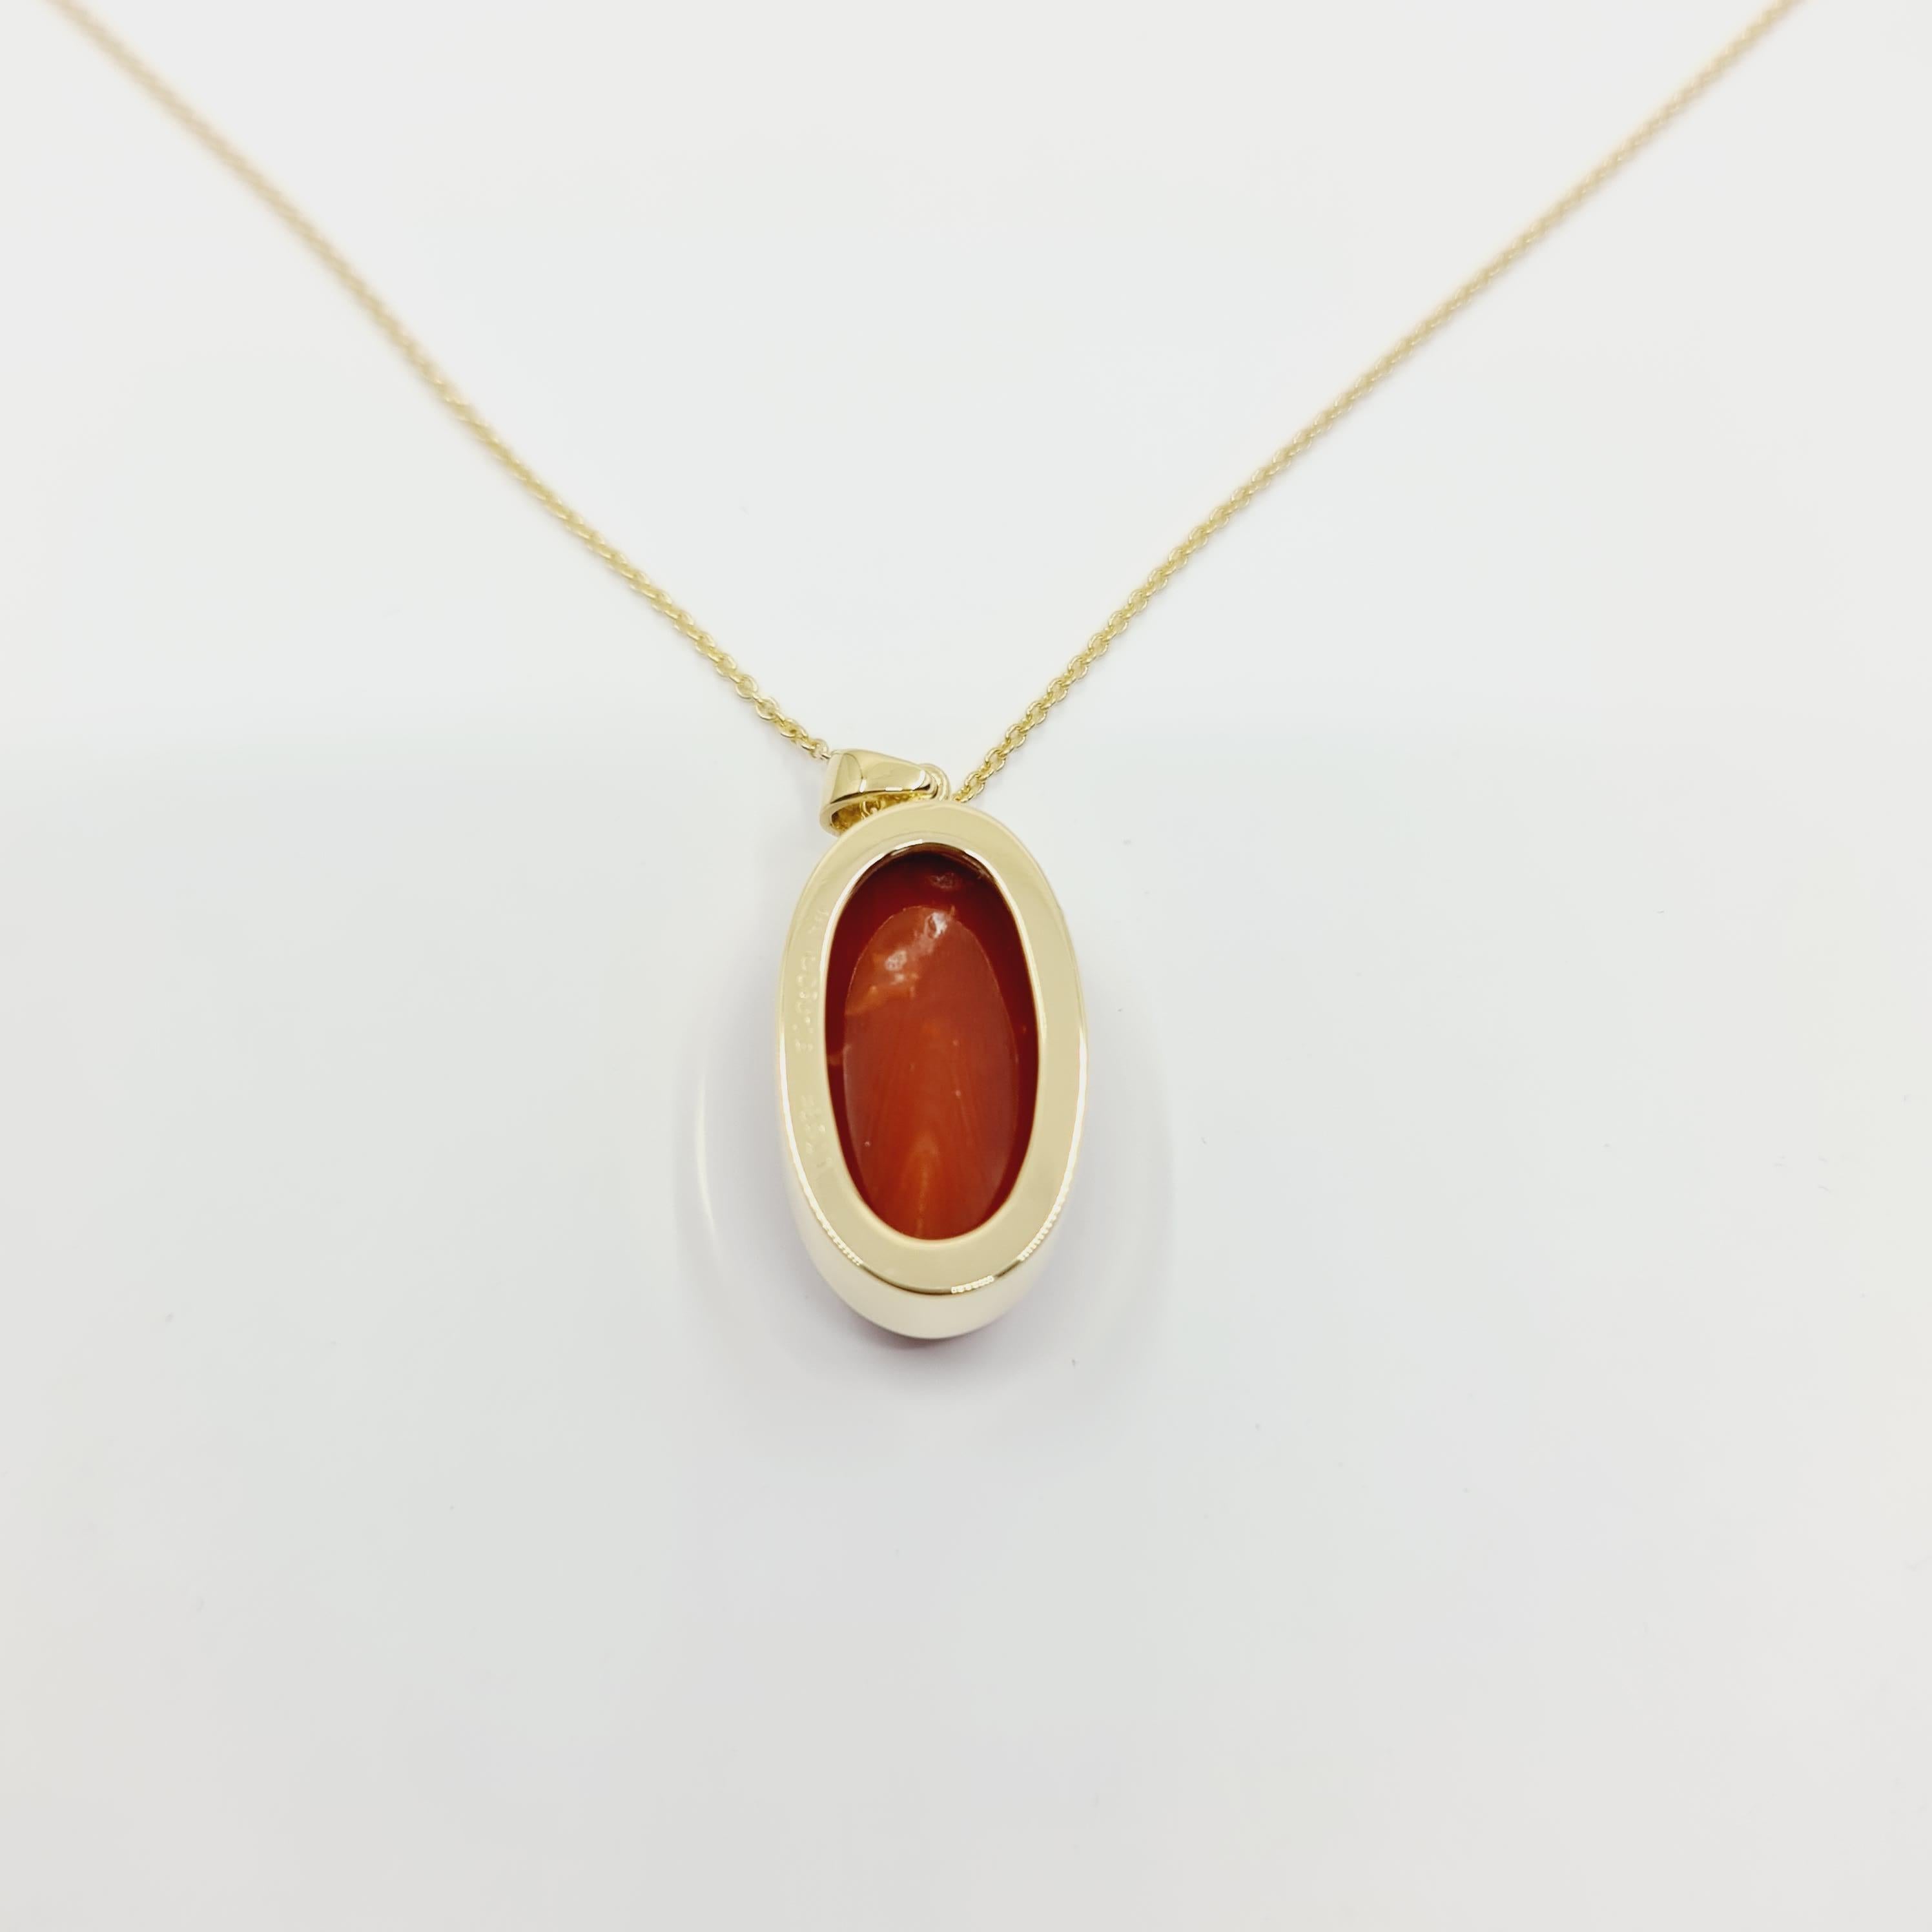 14k Gold Necklace with Oval Cut Natural Coral 13.3 Ct. For Sale 3